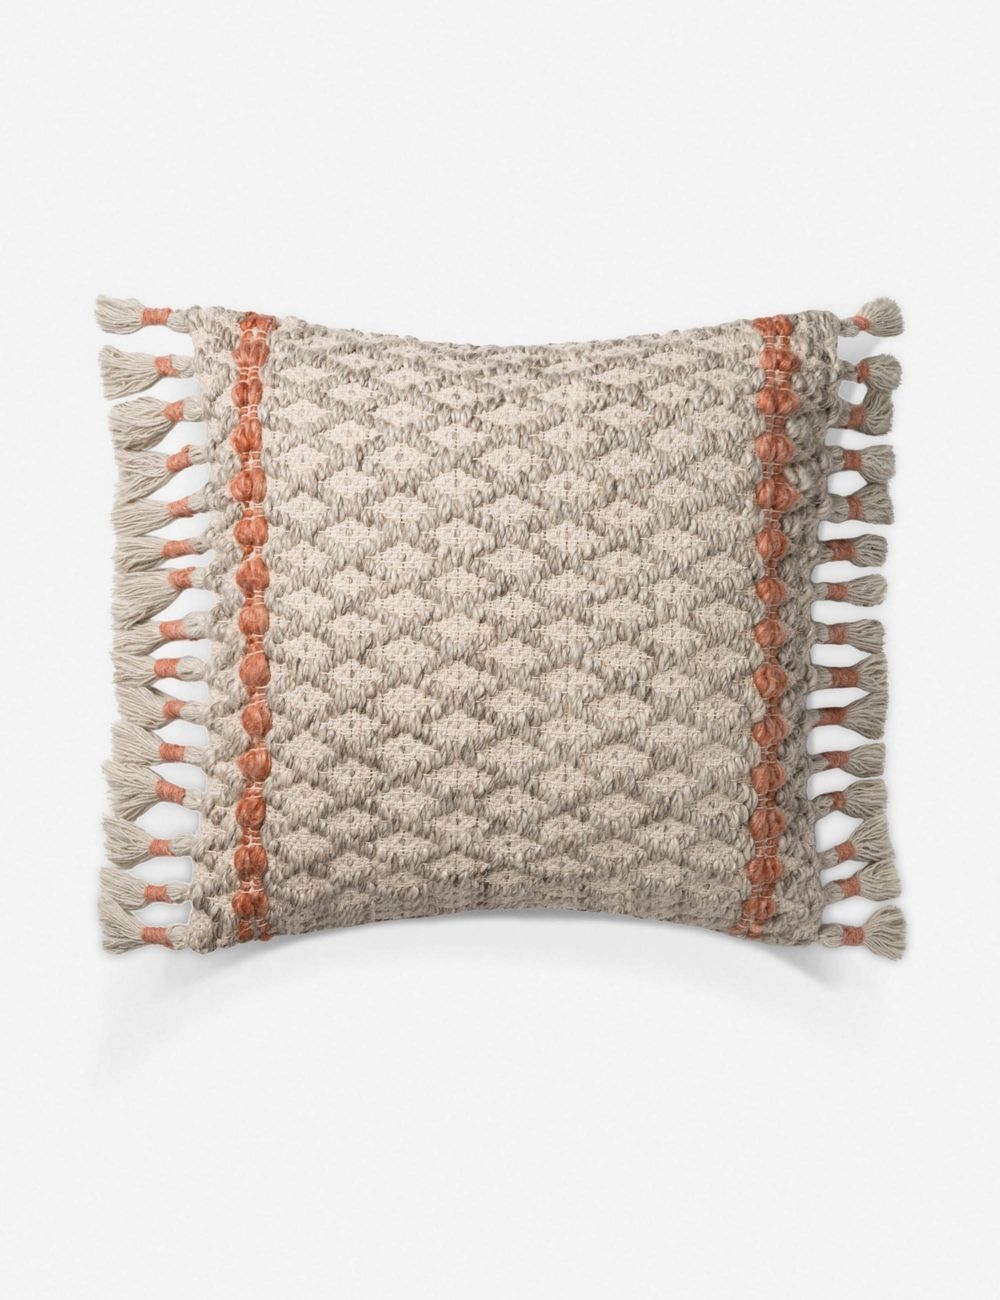 CHELLES PILLOW, GRAY AND RUST, w/ poly insert - Image 0